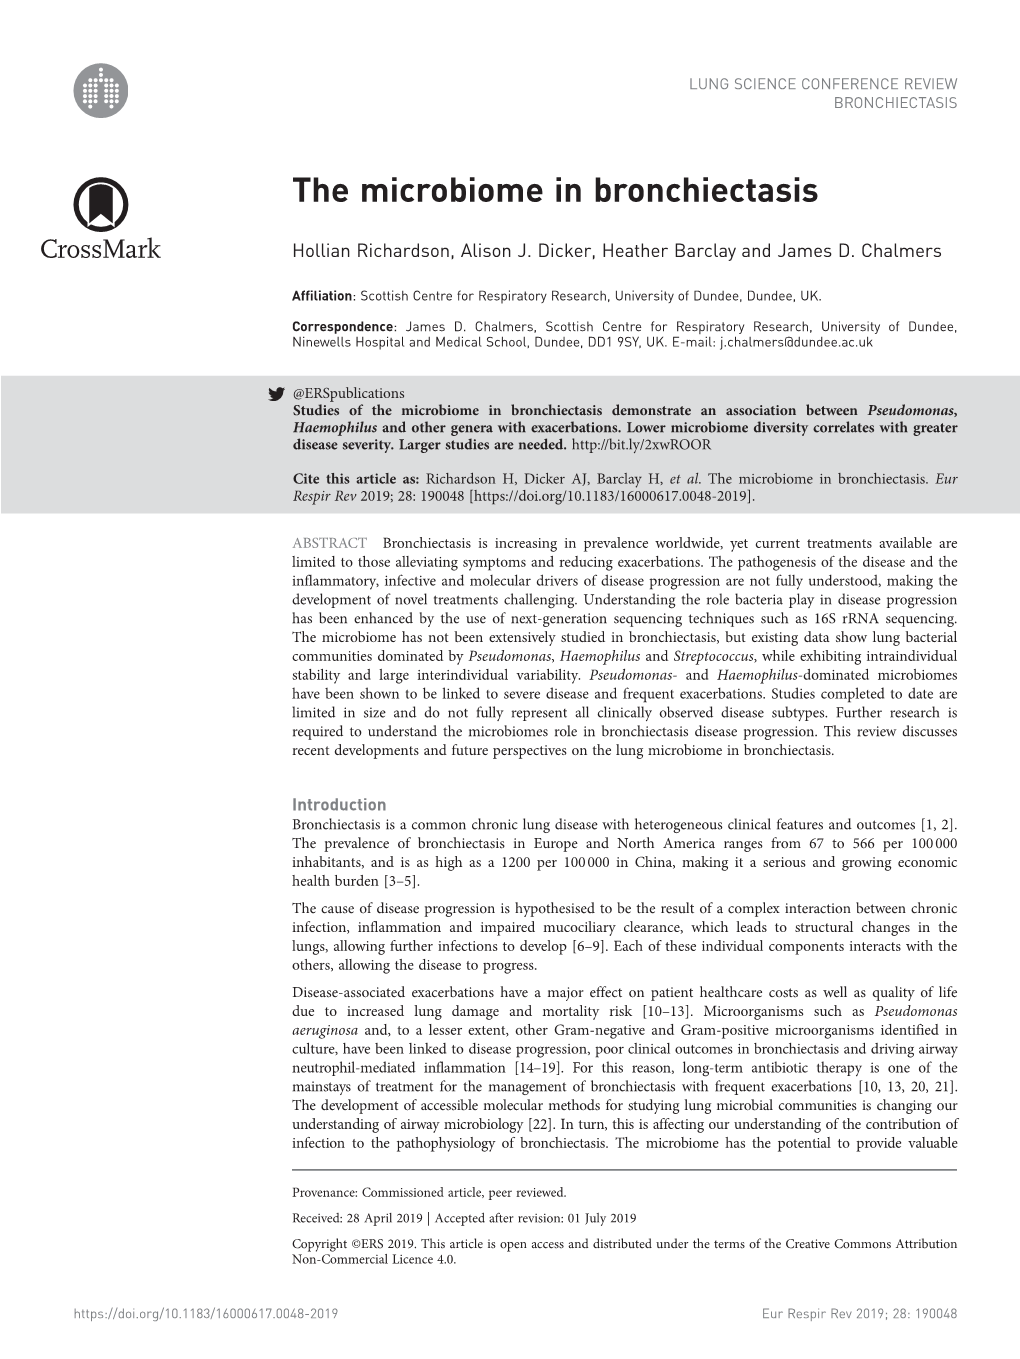 The Microbiome in Bronchiectasis